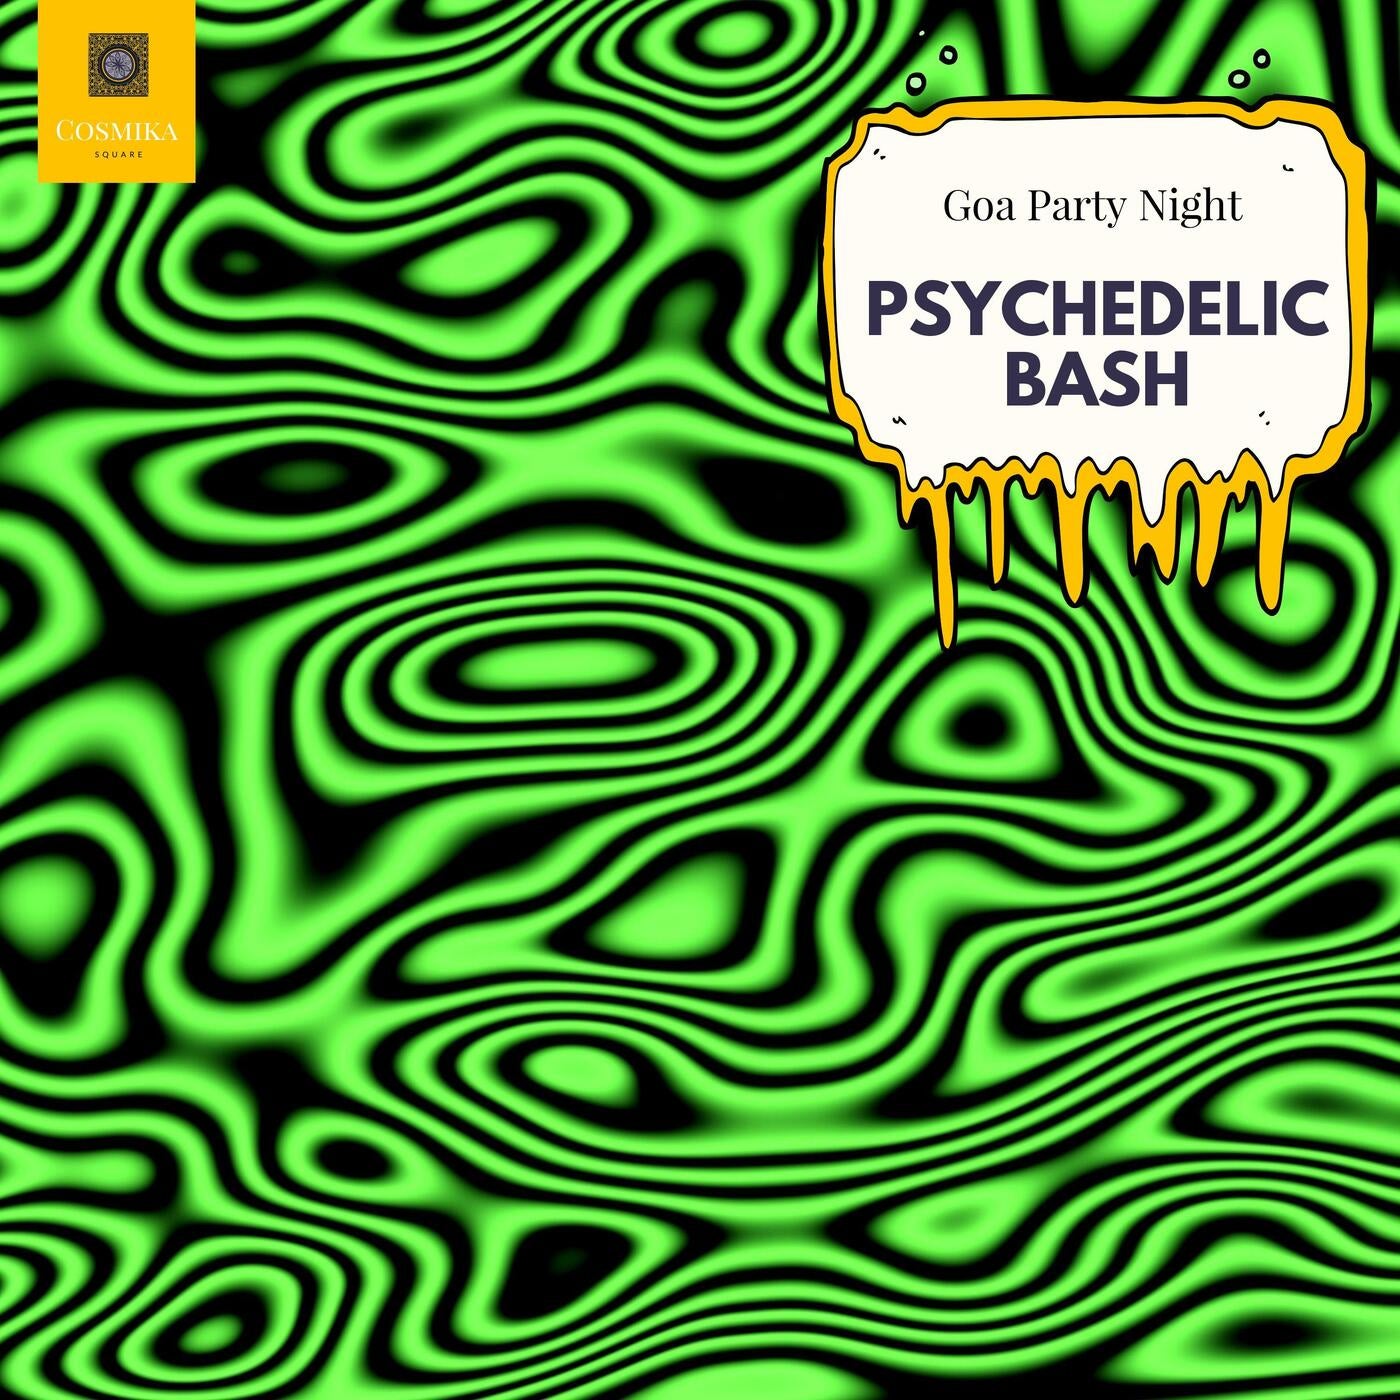 Psychedelic Bash - Goa Party Night